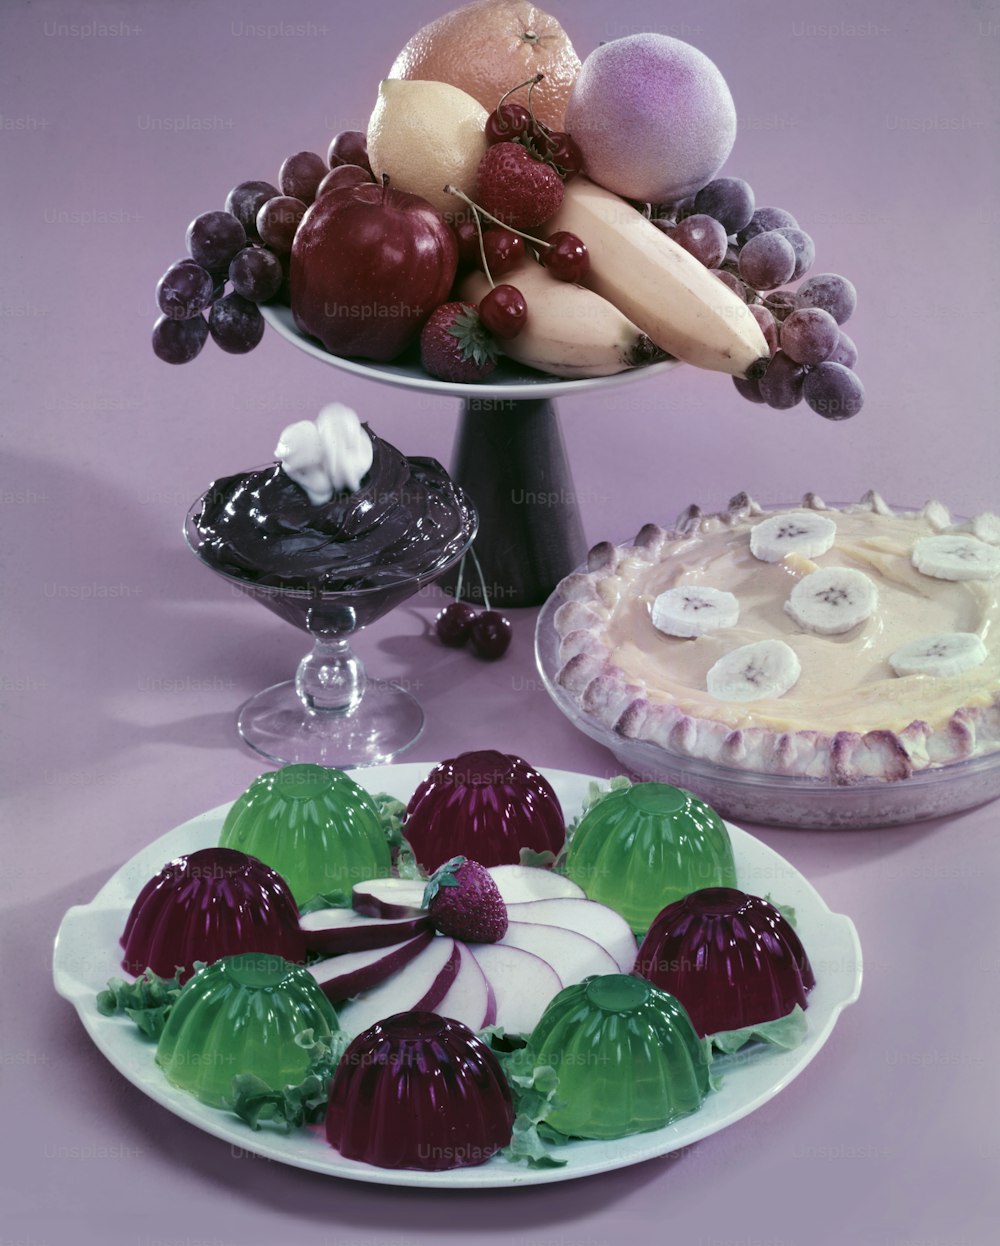 View of several dessert offerings, including molded red & green gelatin garnished with sliced apple, a banana-cream pie, chocolate pudding, and an assortment of fruit, 1950. (Photo by Tom Kelley/Getty Images)